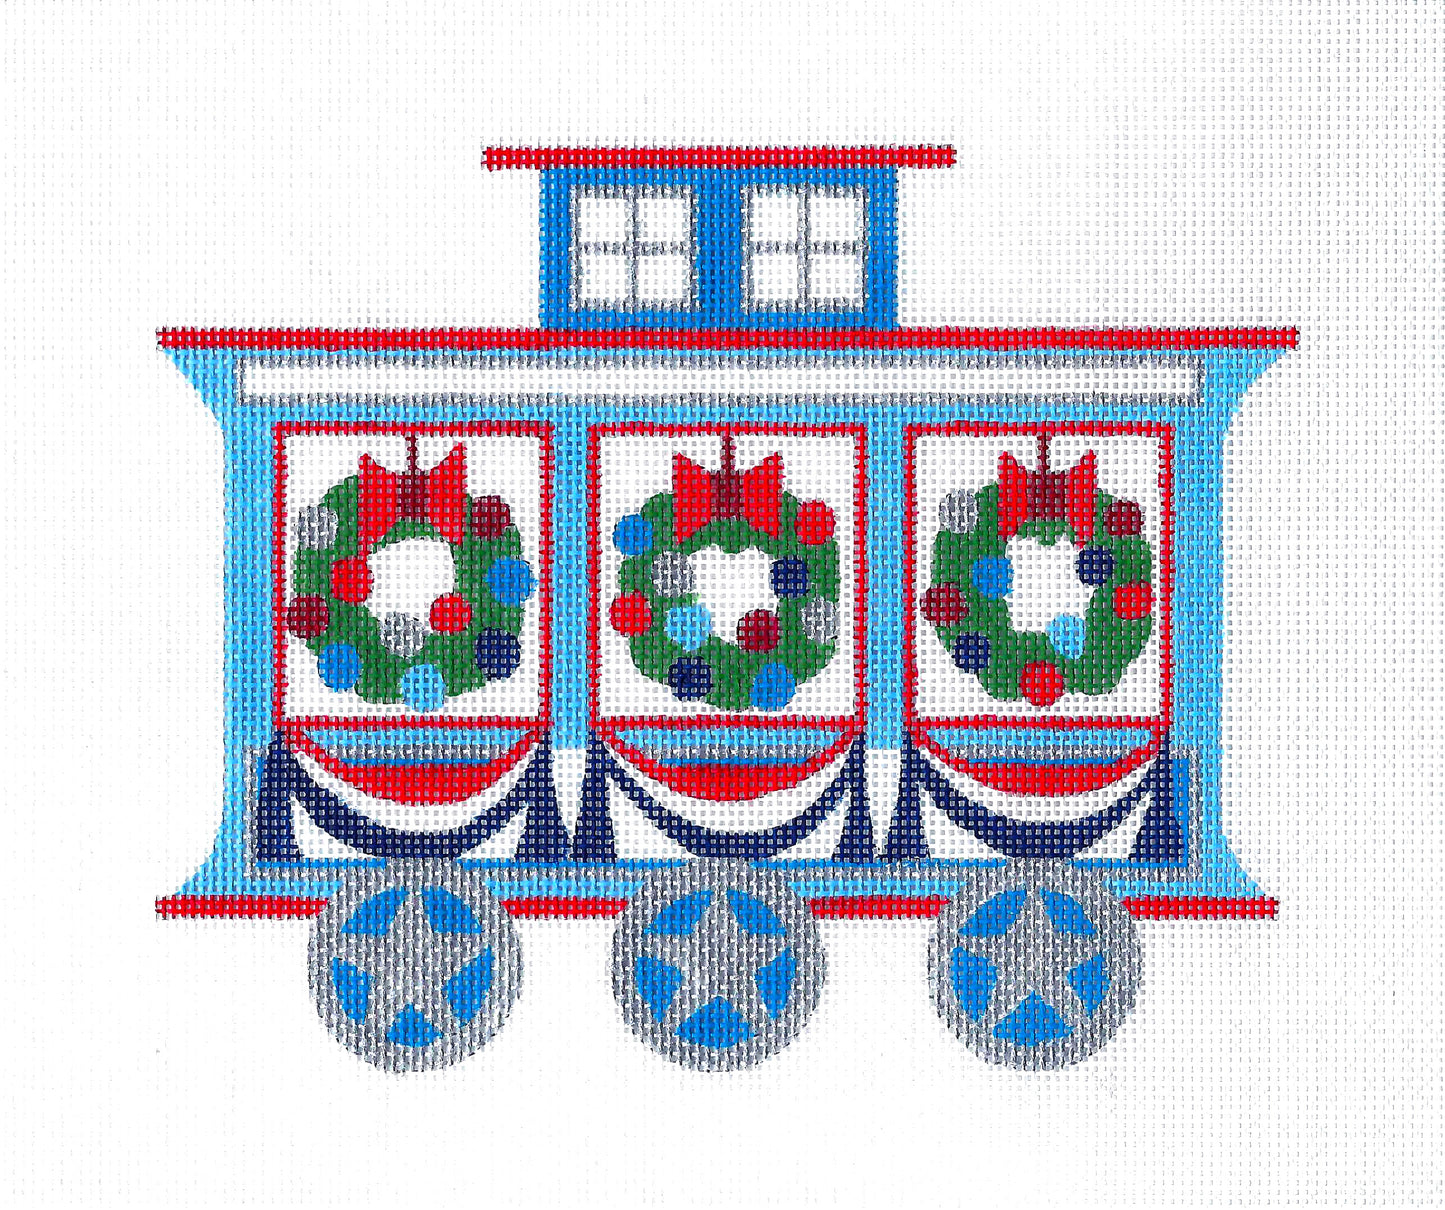 Train ~ Patriotic Train Caboose with Window Wreaths Red, White, Silver & Blue handpainted Needlepoint Canvas by Raymond Crawford